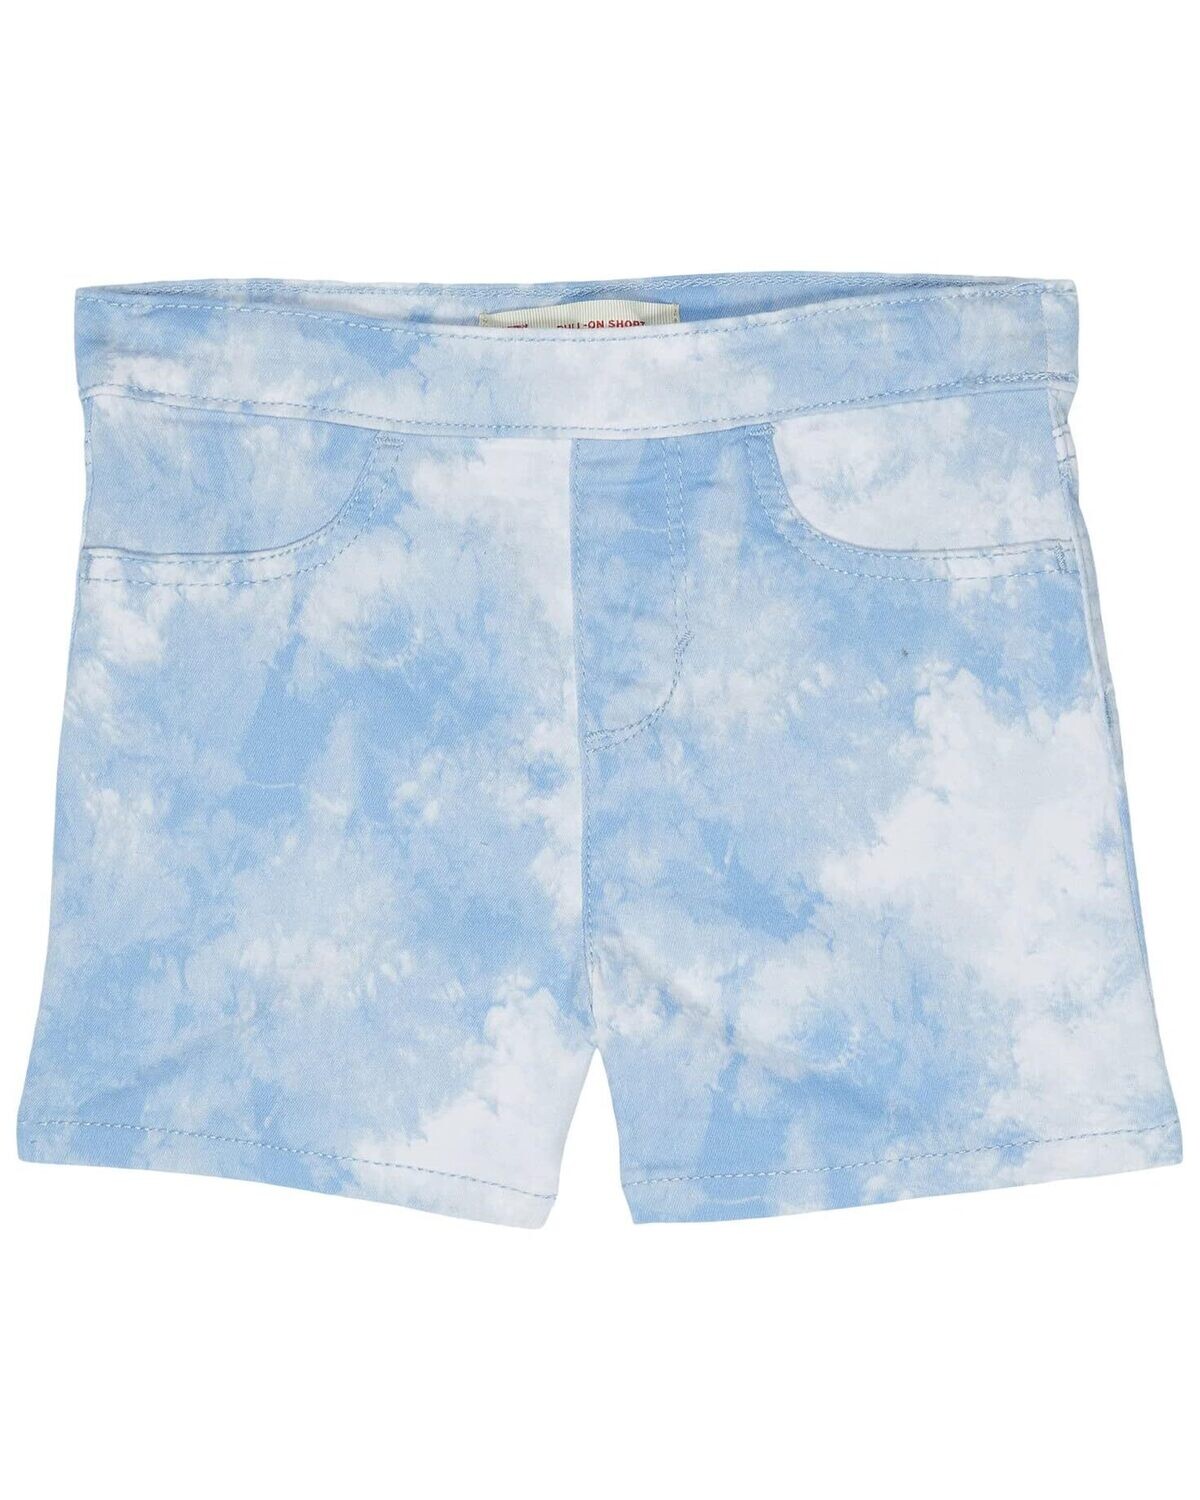 Levi's Kids Pull-on Shorty Shorts (Little Kids) (Cloud Wash) Girl's Shorts - Size 6